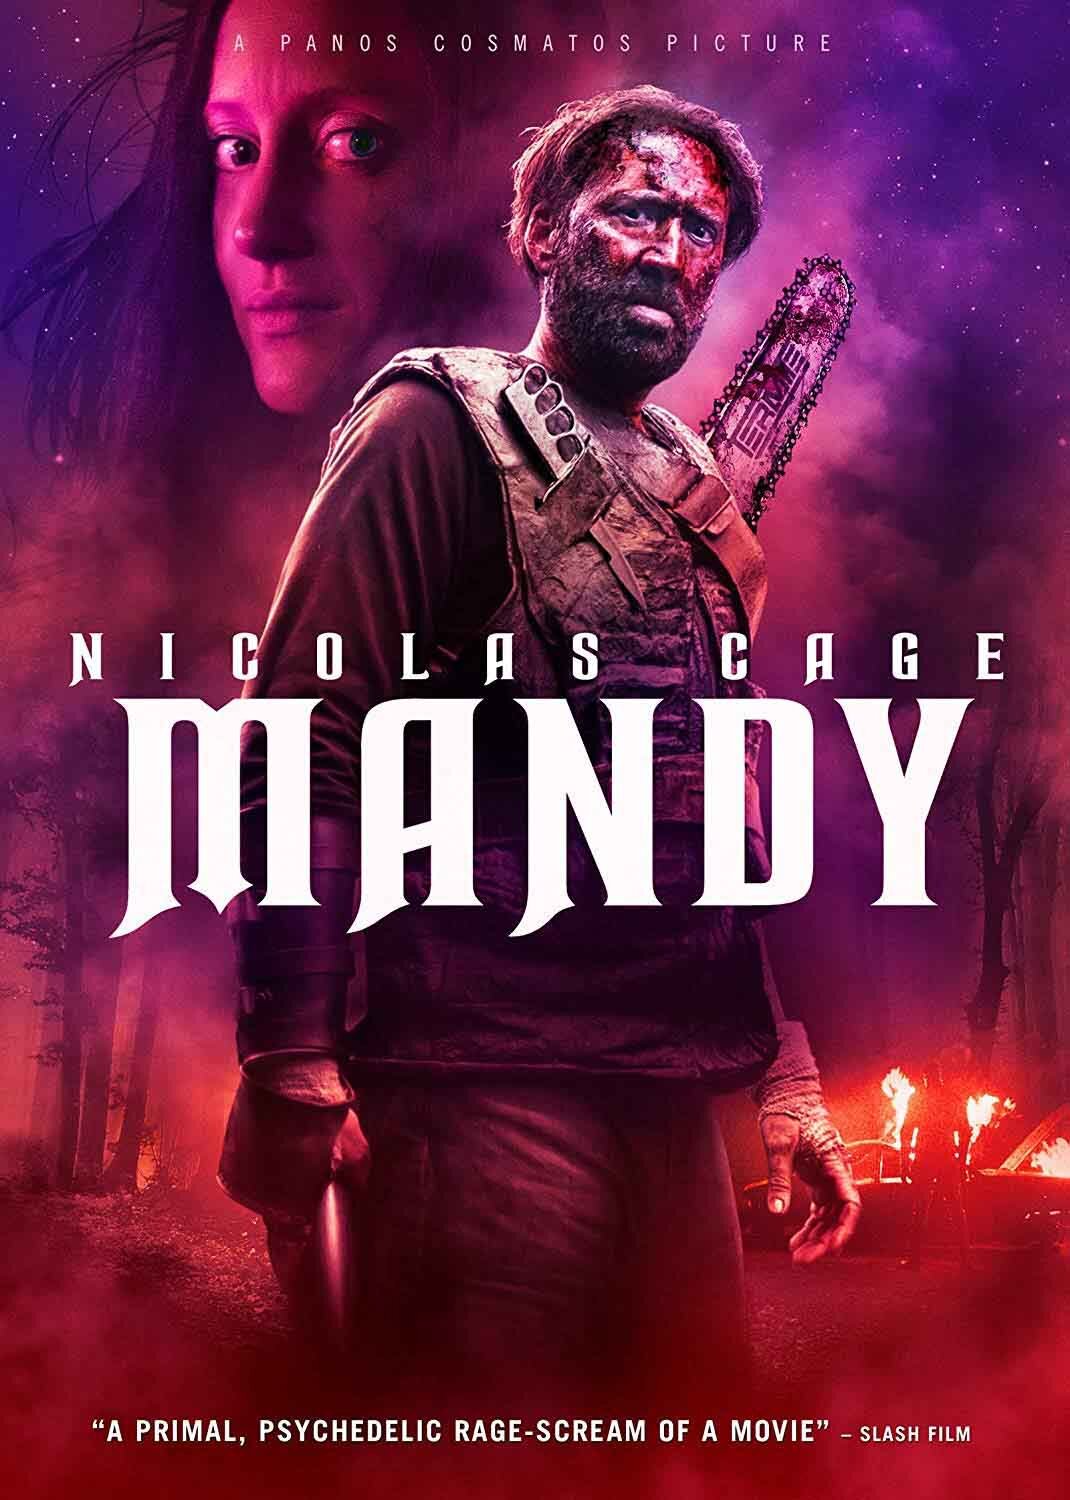 Mandy Horror Movie Poster featuring a man with a chaisnsaw